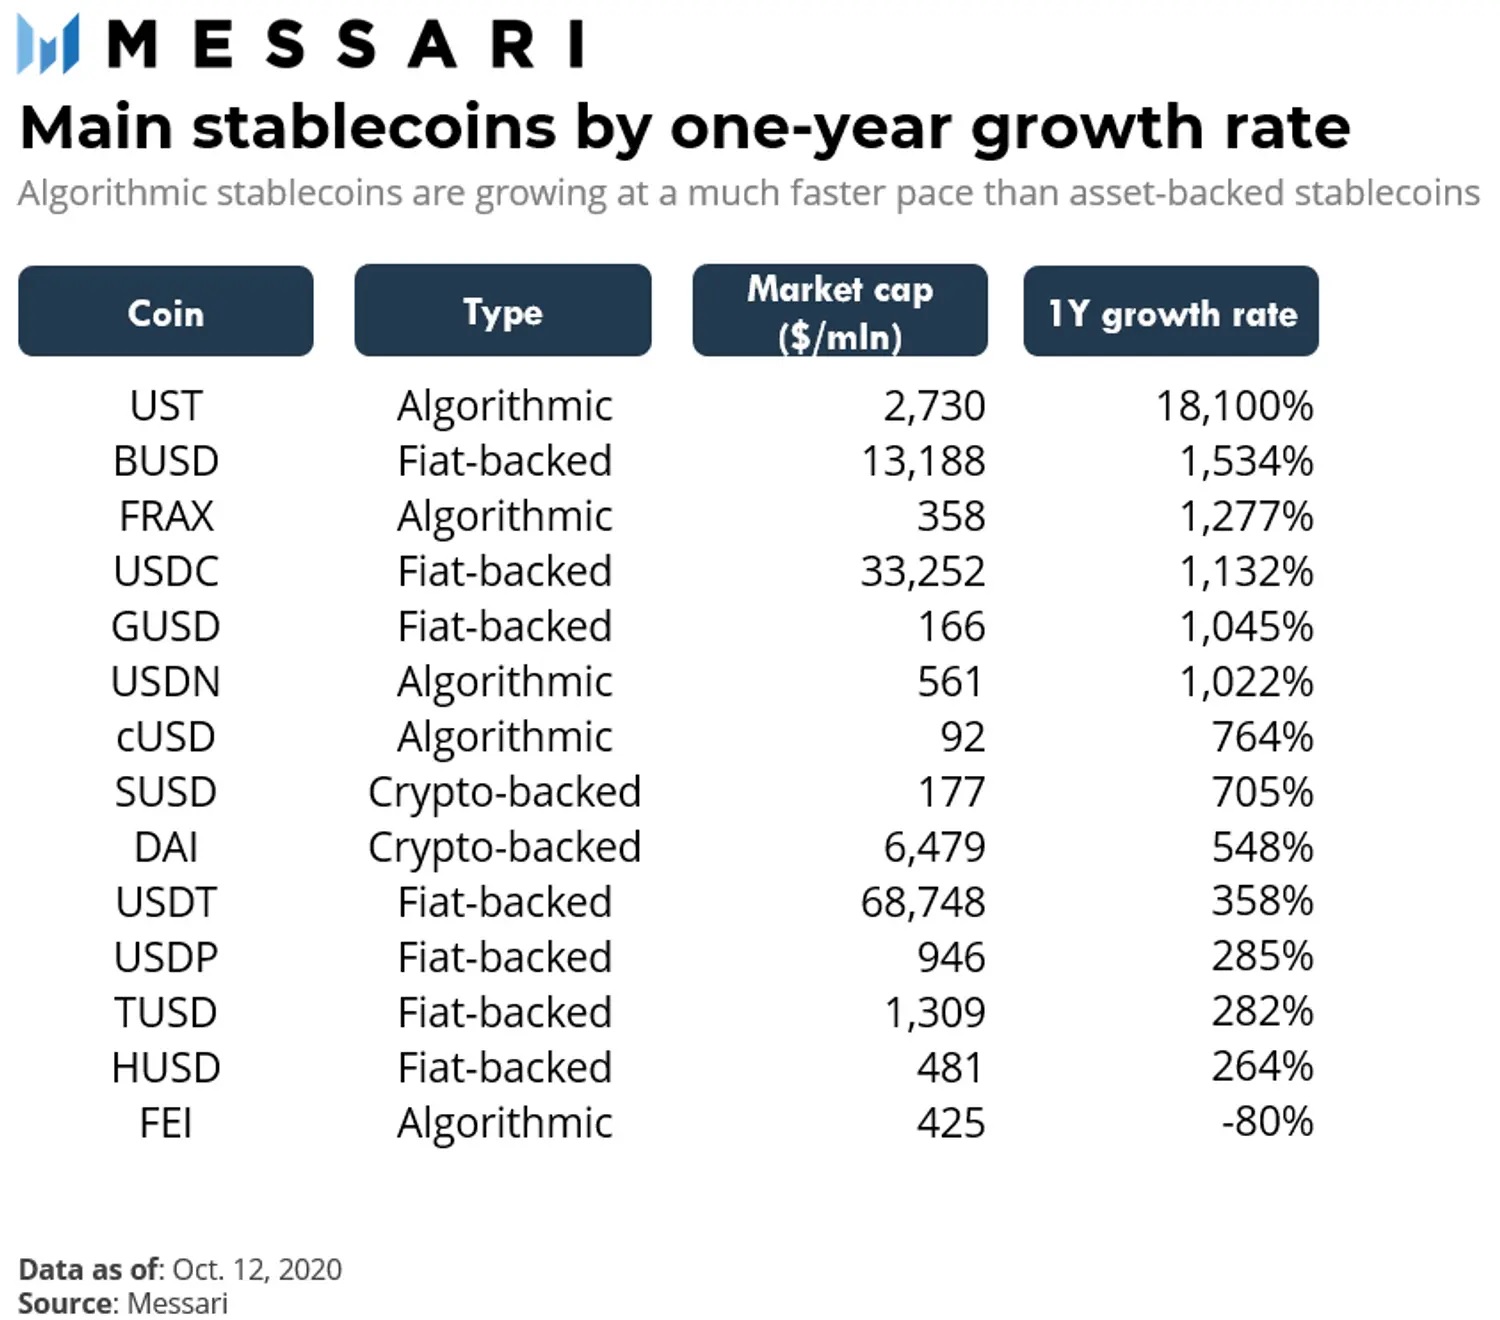 Main stablecoin by rate. Nguồn: Messari